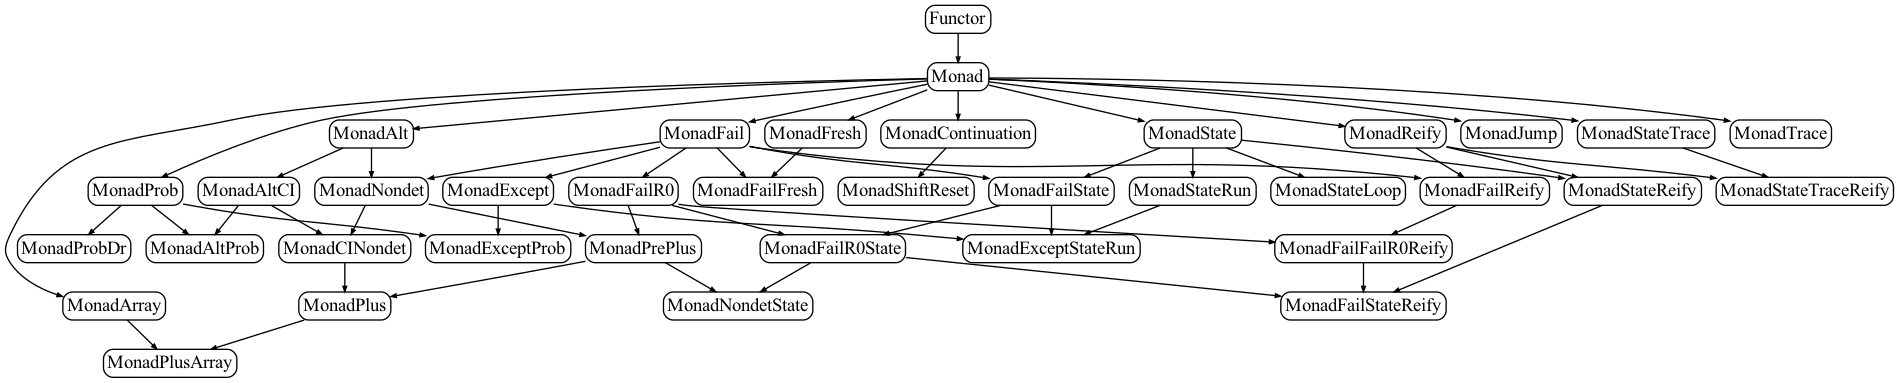 Available monads